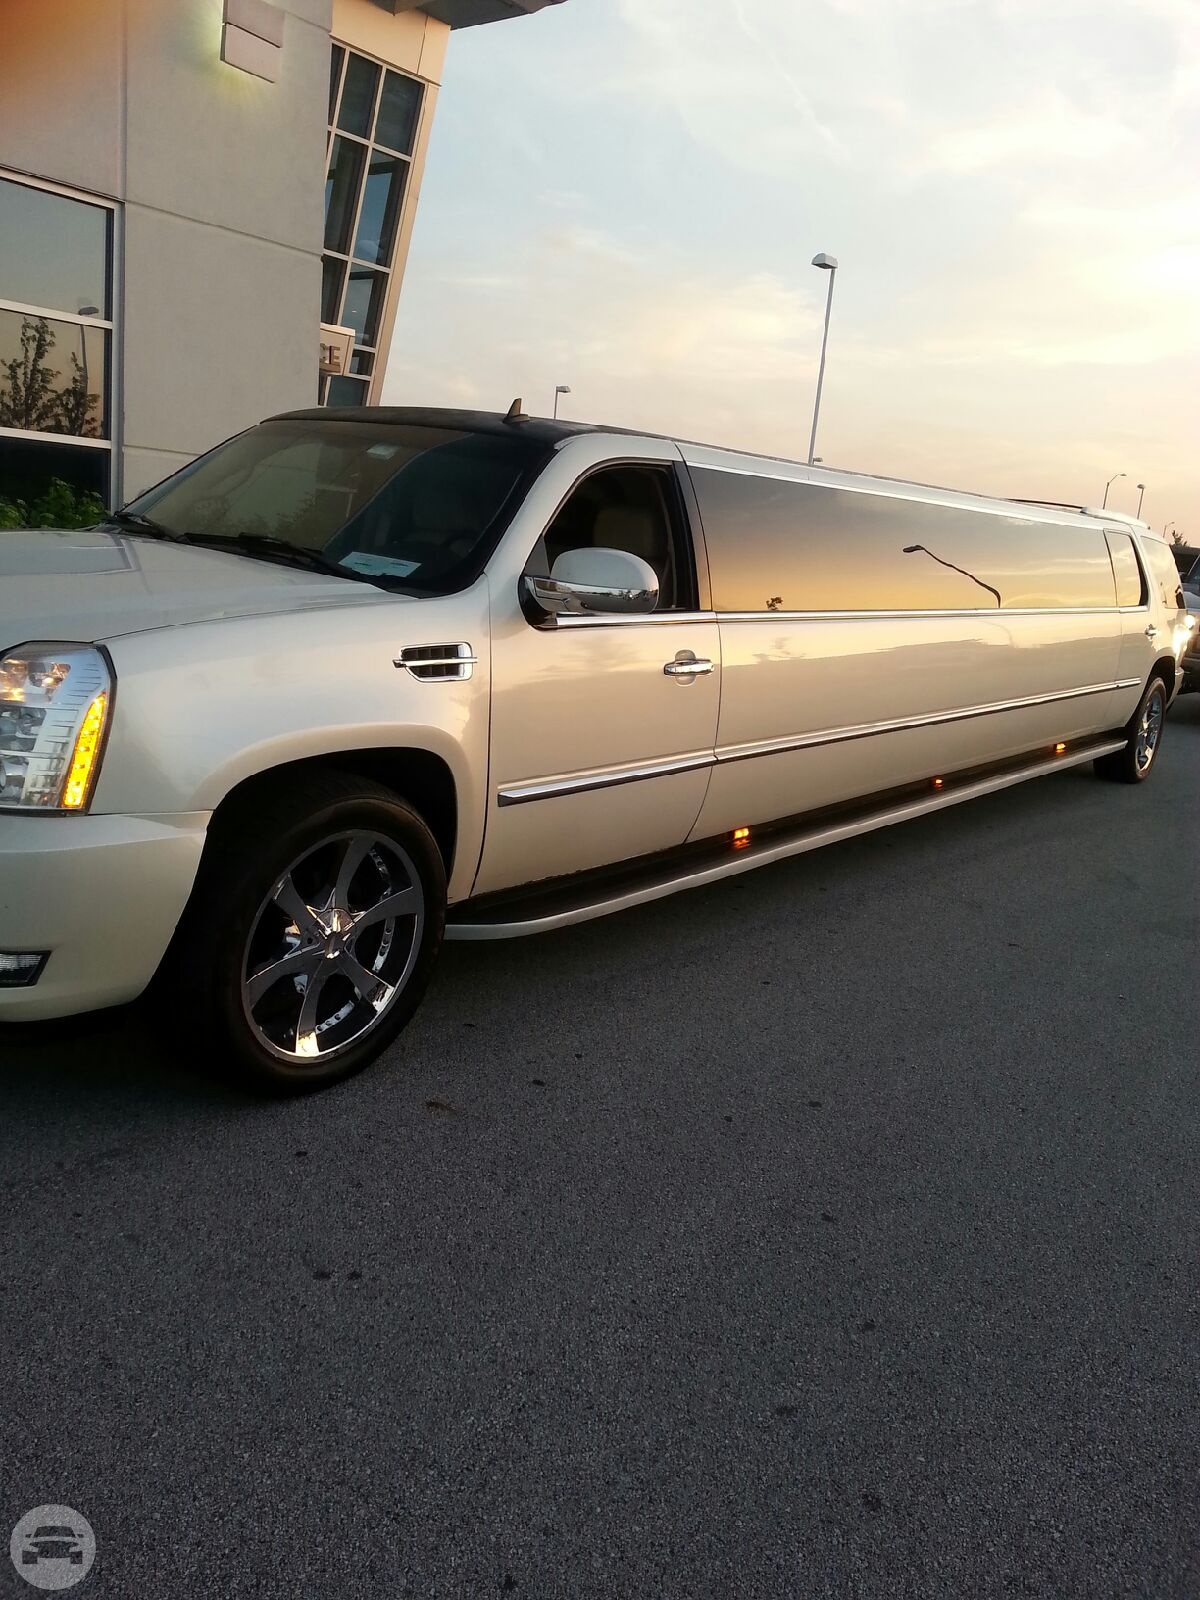 Cadillac Escalade Limousine
Limo /
Chicago, IL

 / Hourly $0.00
